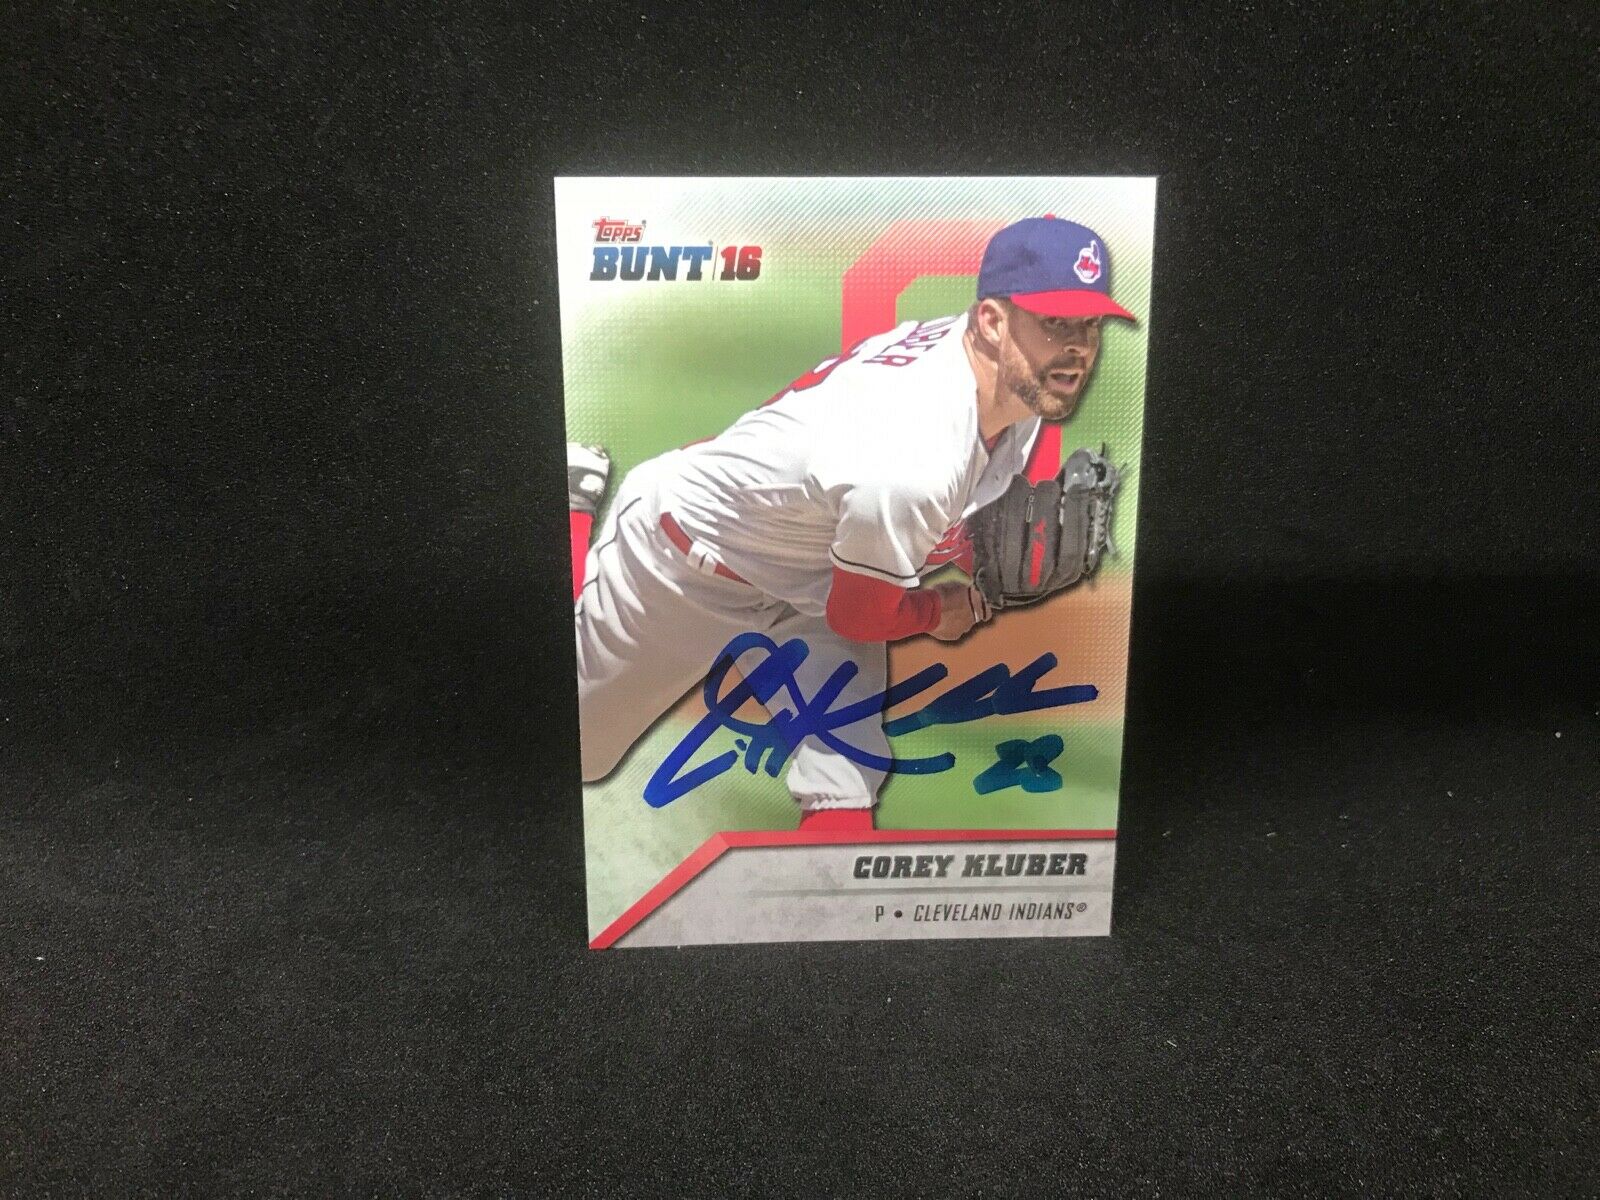 COREY KLUBER Rangers Indians Autographed SIGNED 2016 Topps Bunt